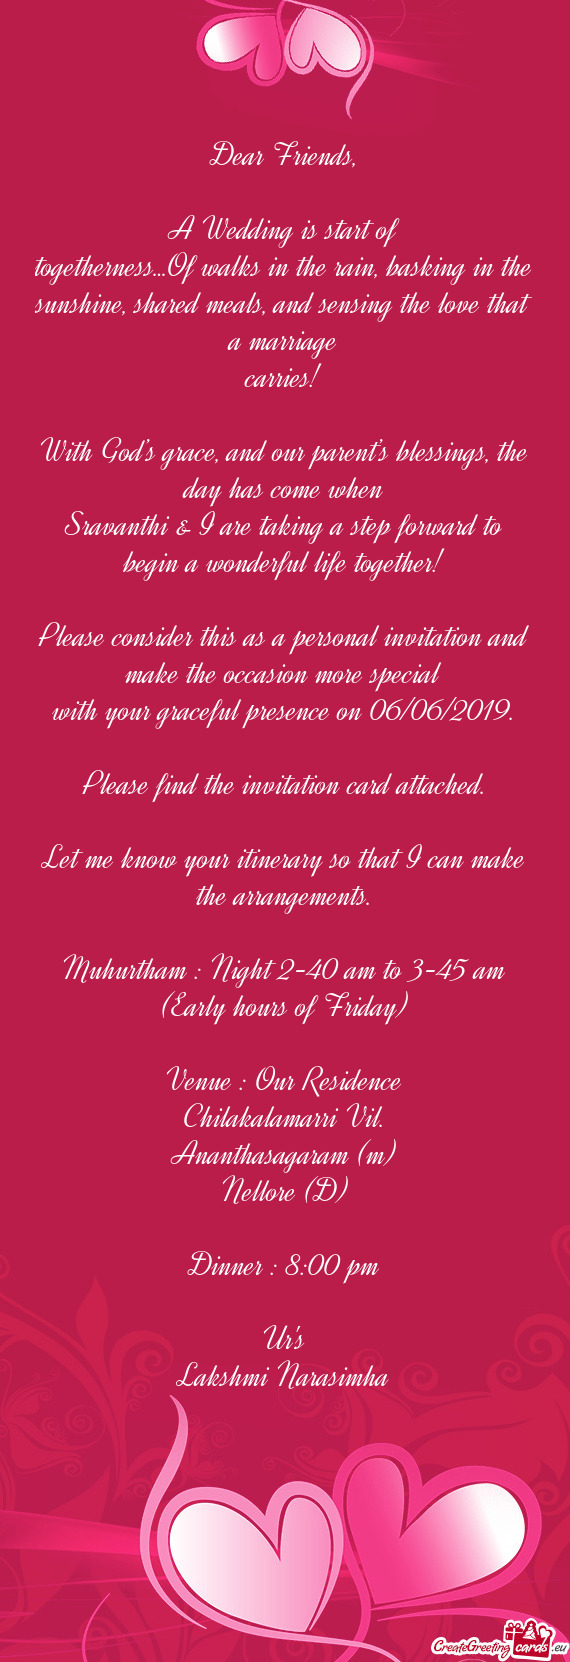 Please consider this as a personal invitation and make the occasion more special